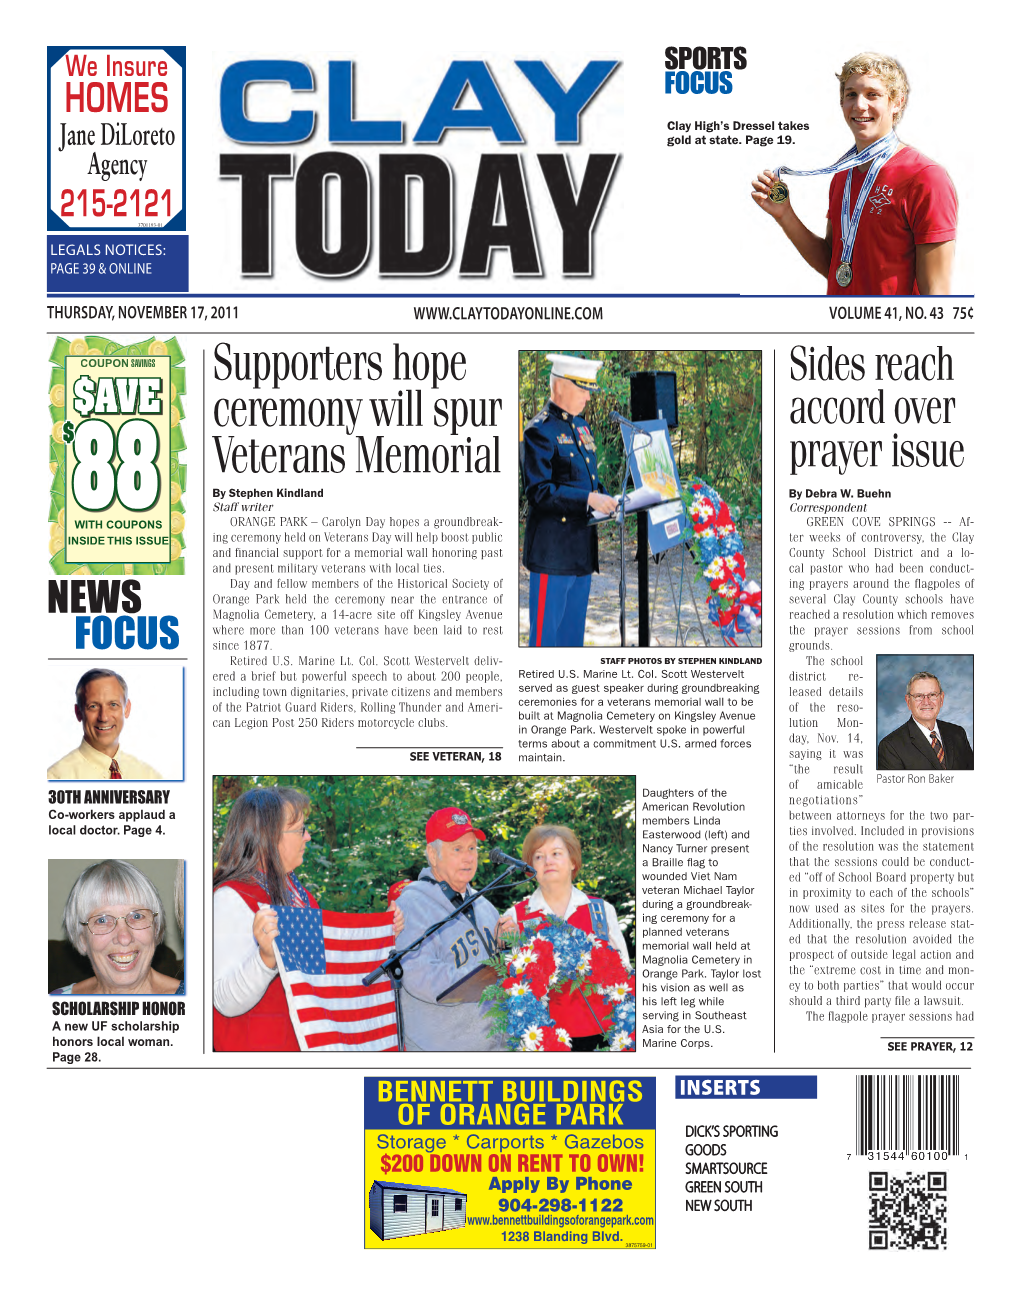 Supporters Hope Ceremony Will Spur Veterans Memorial